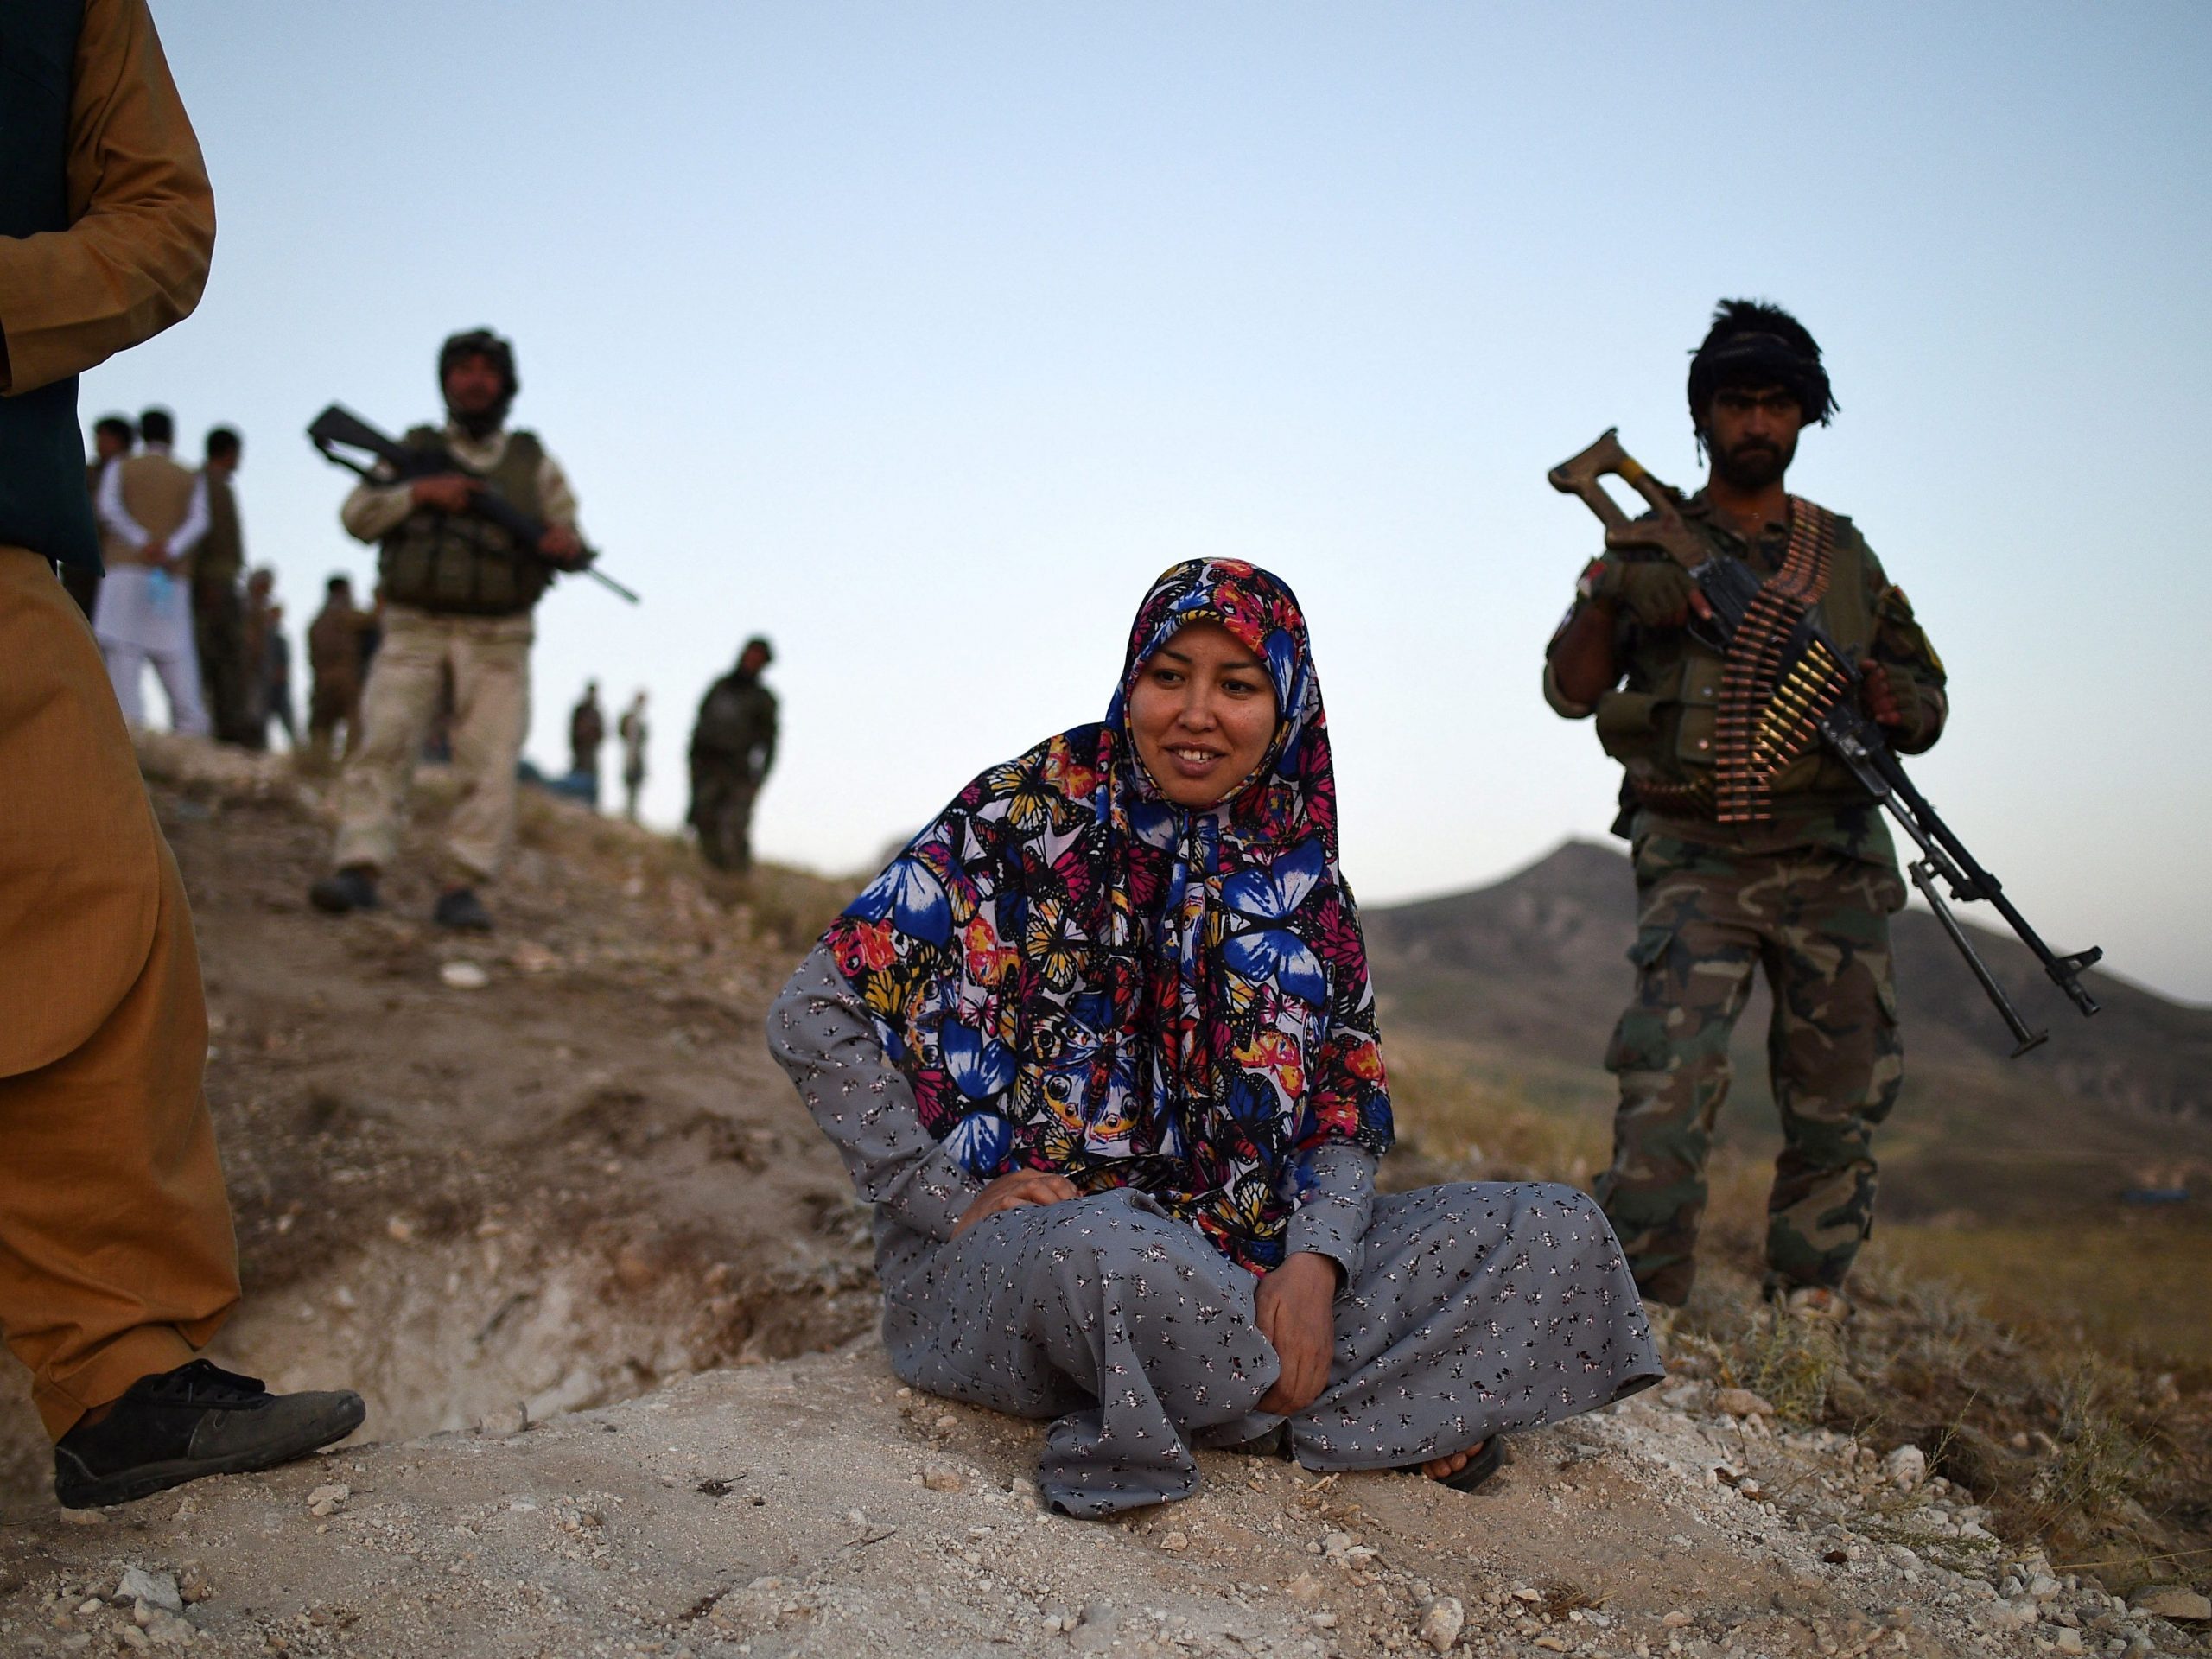 This photograph taken on July 14, 2021 shows Salima Mazari (C), a female district governor in male-dominated Afghanistan, looking on from a hill while accompanied by security personnel near the frontlines against the Taliban at Charkint district in Balkh province.